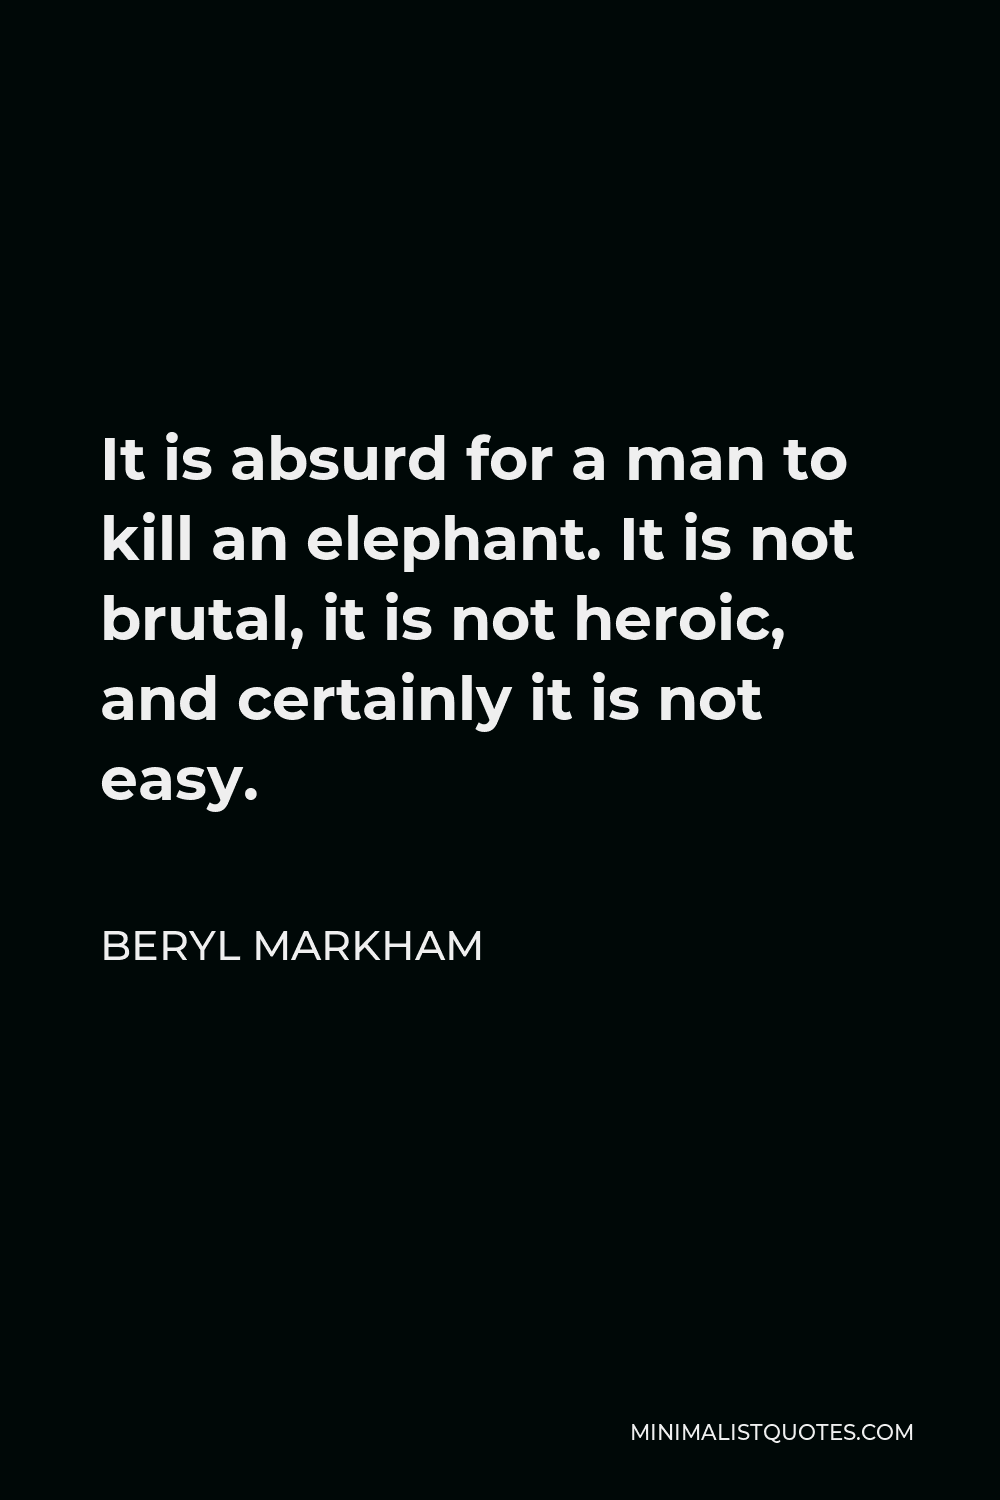 Beryl Markham Quote - It is absurd for a man to kill an elephant. It is not brutal, it is not heroic, and certainly it is not easy.